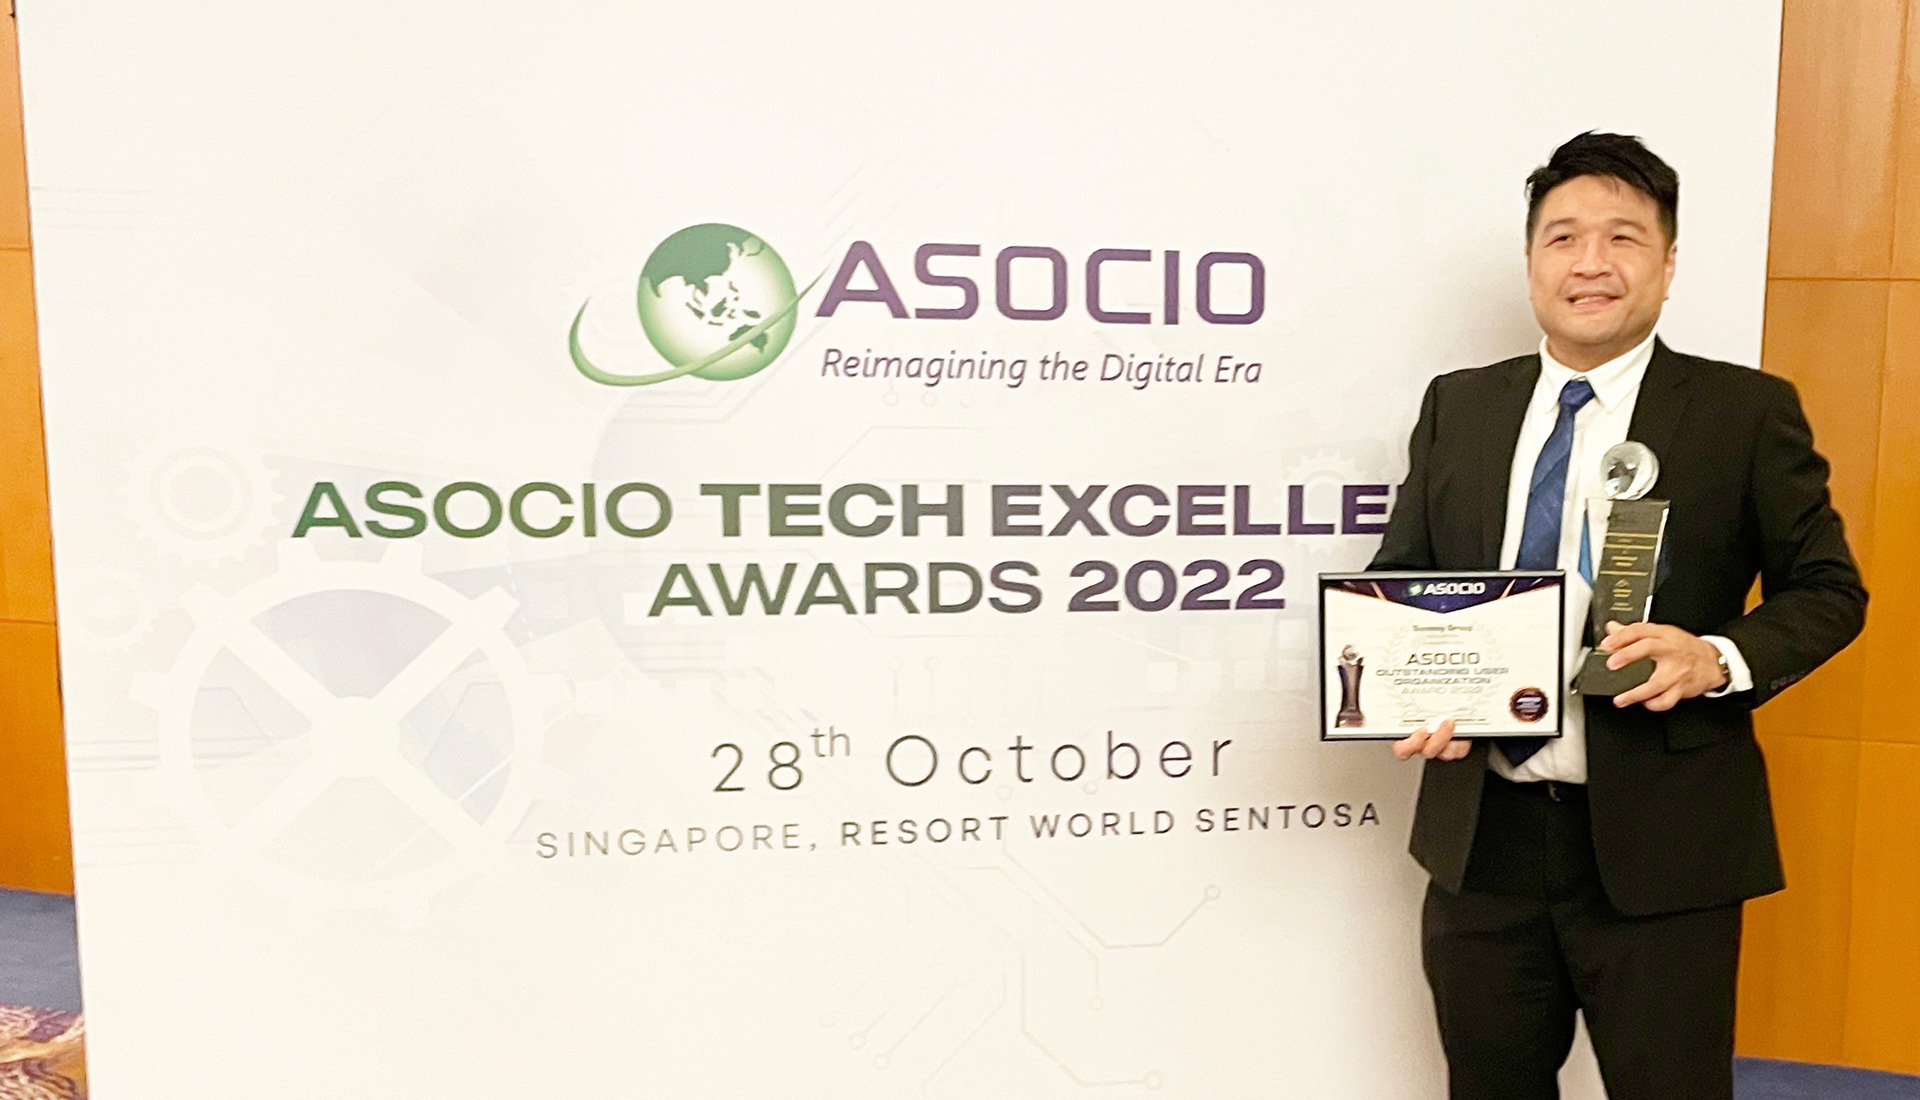 Sunway Recognised for Digital Innovation and Technological Excellence at Prestigious Ict Awards